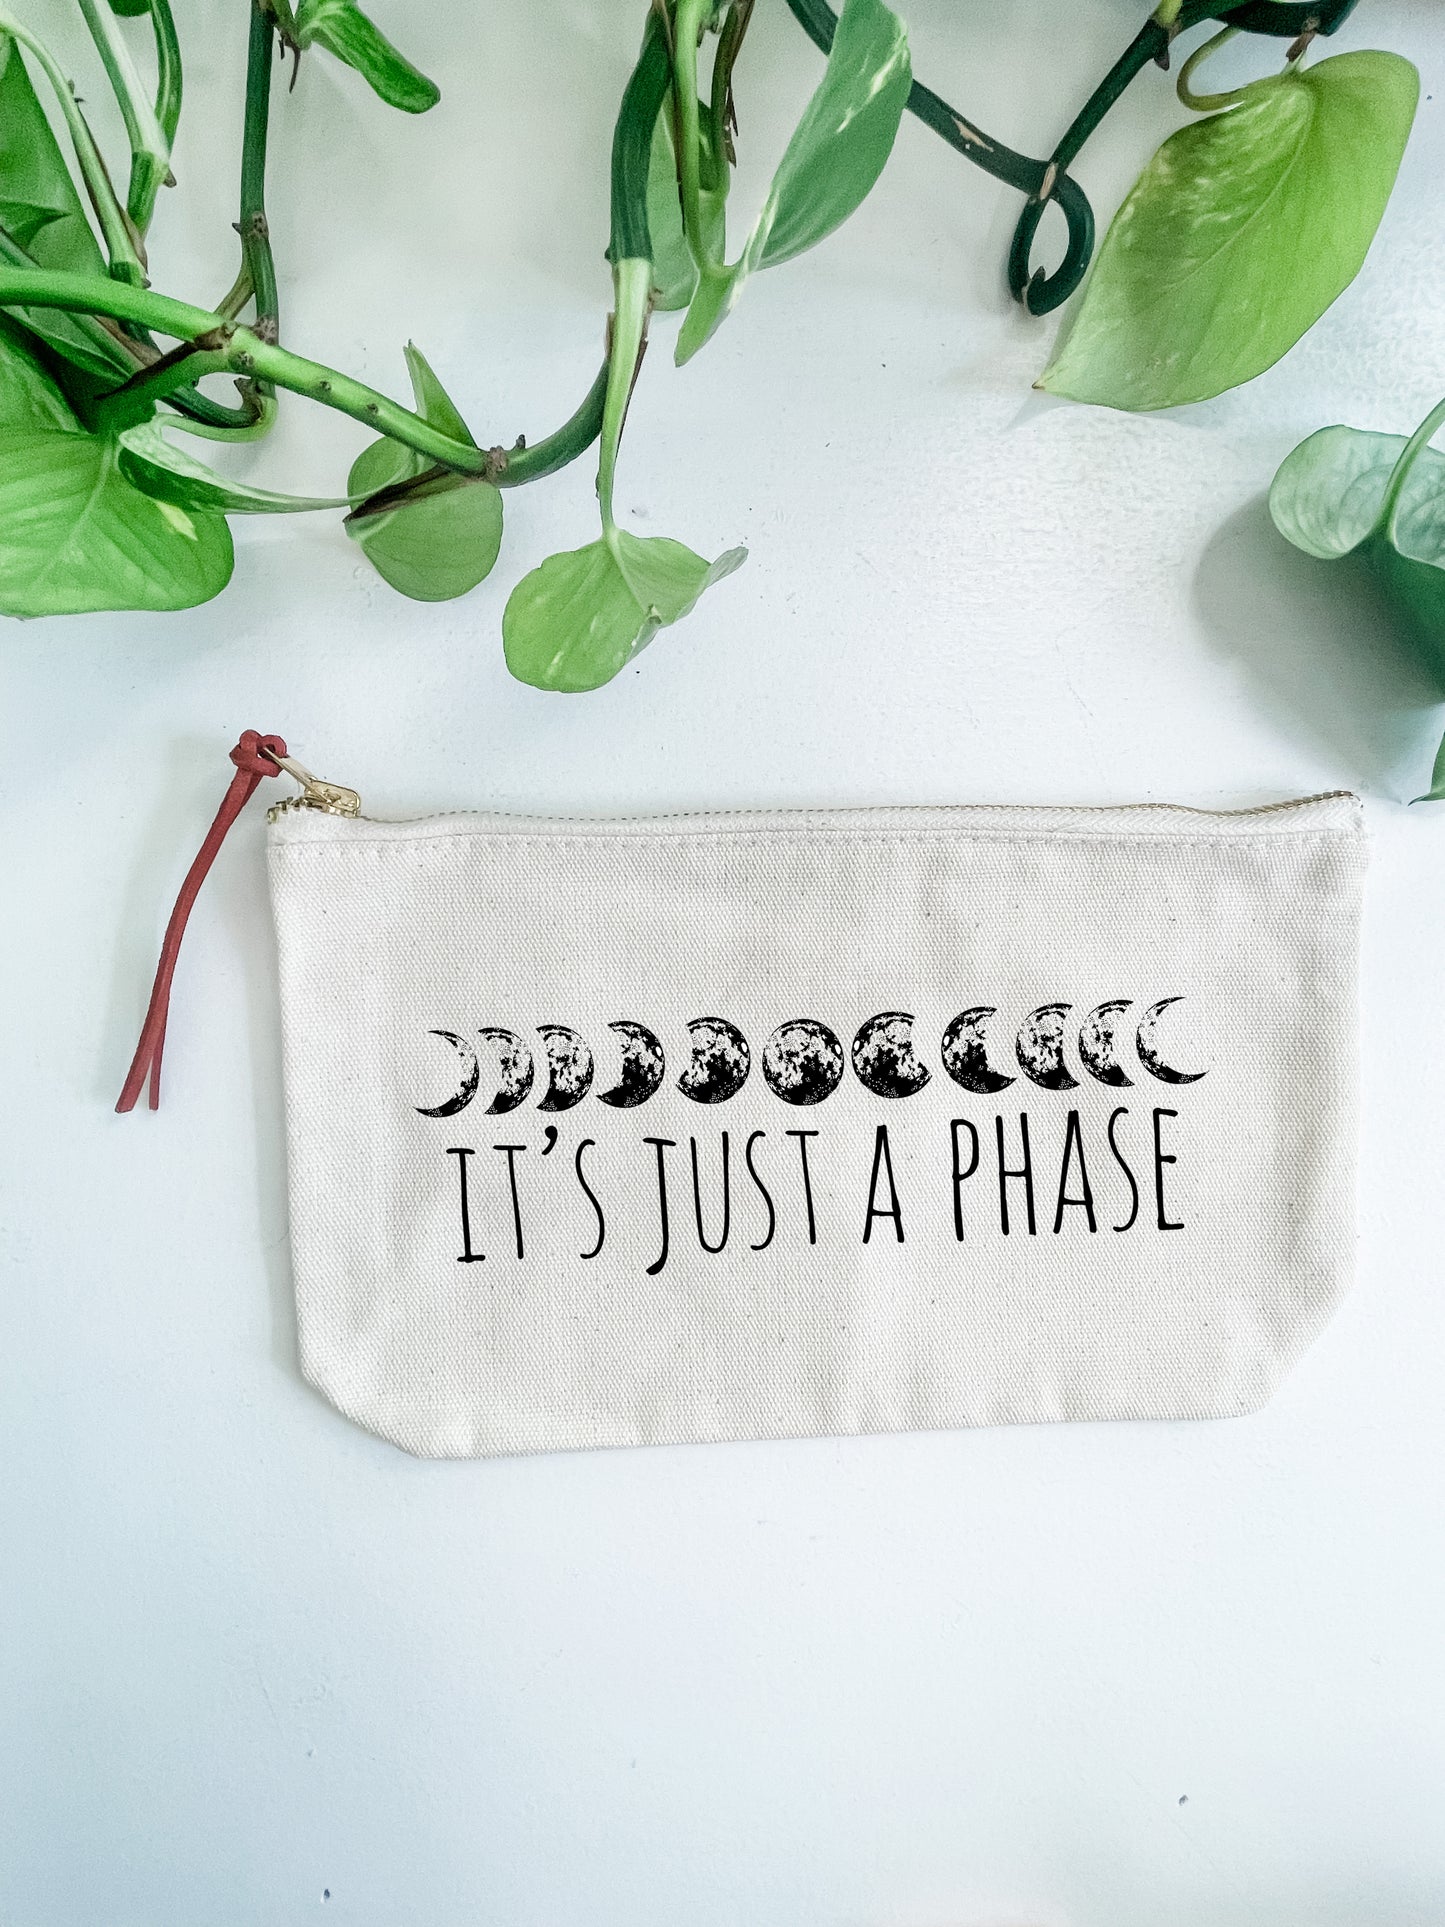 It's Just A Phase (Moon) - Canvas Zipper Pouch